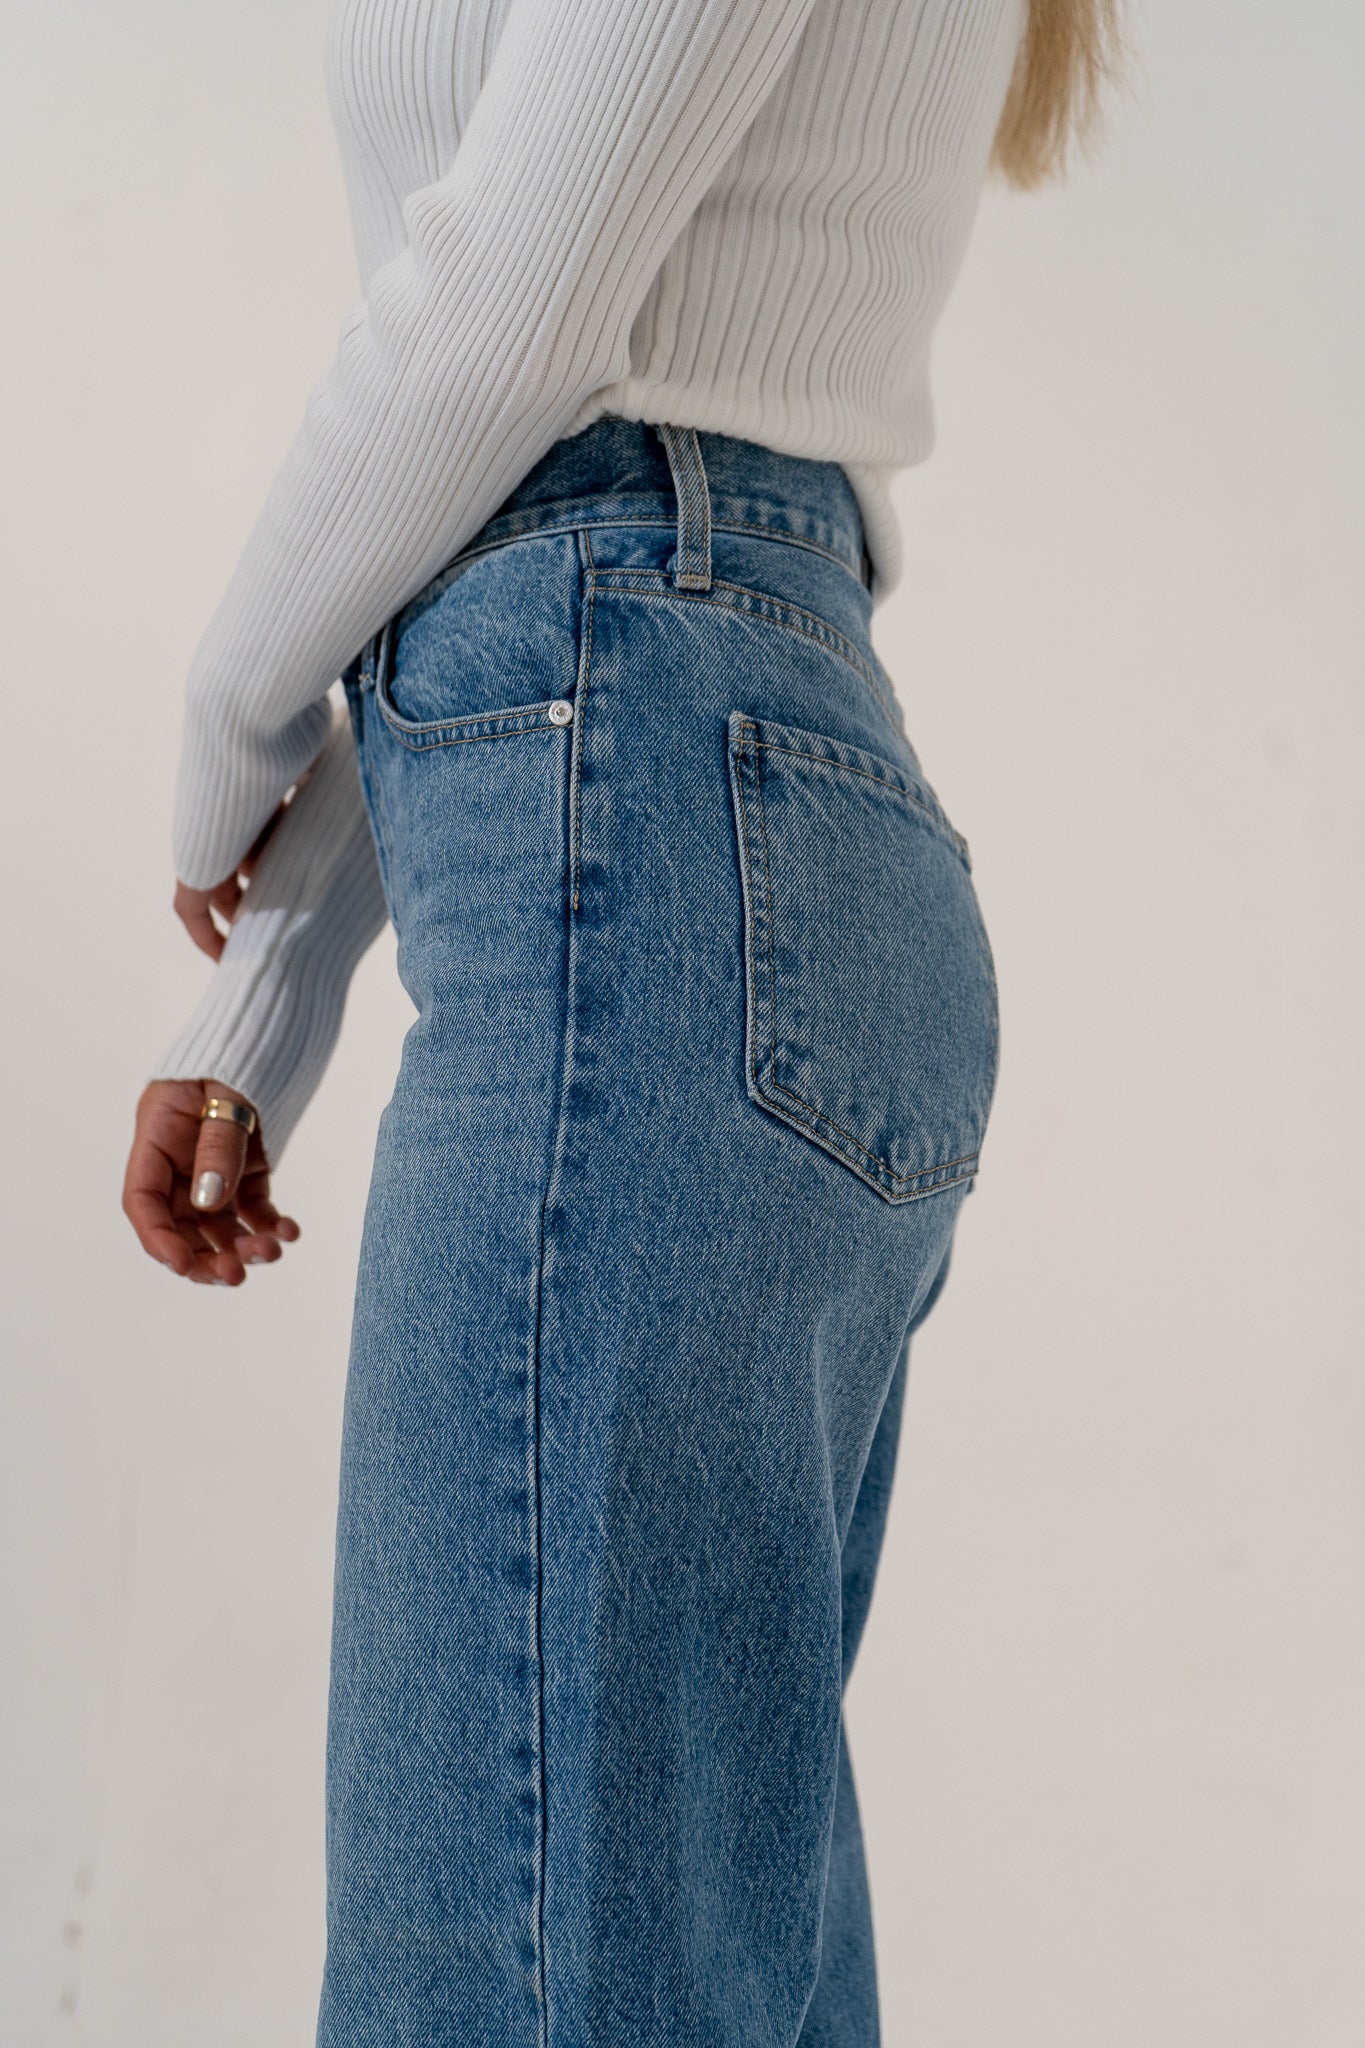 The Throwback Straight. Channel classic IT GIRL in a jean that's straight out of 1998. The classic rinse wash and true-waist rise are very "now", while the throwback cut is perfect for fall. Style up or down.